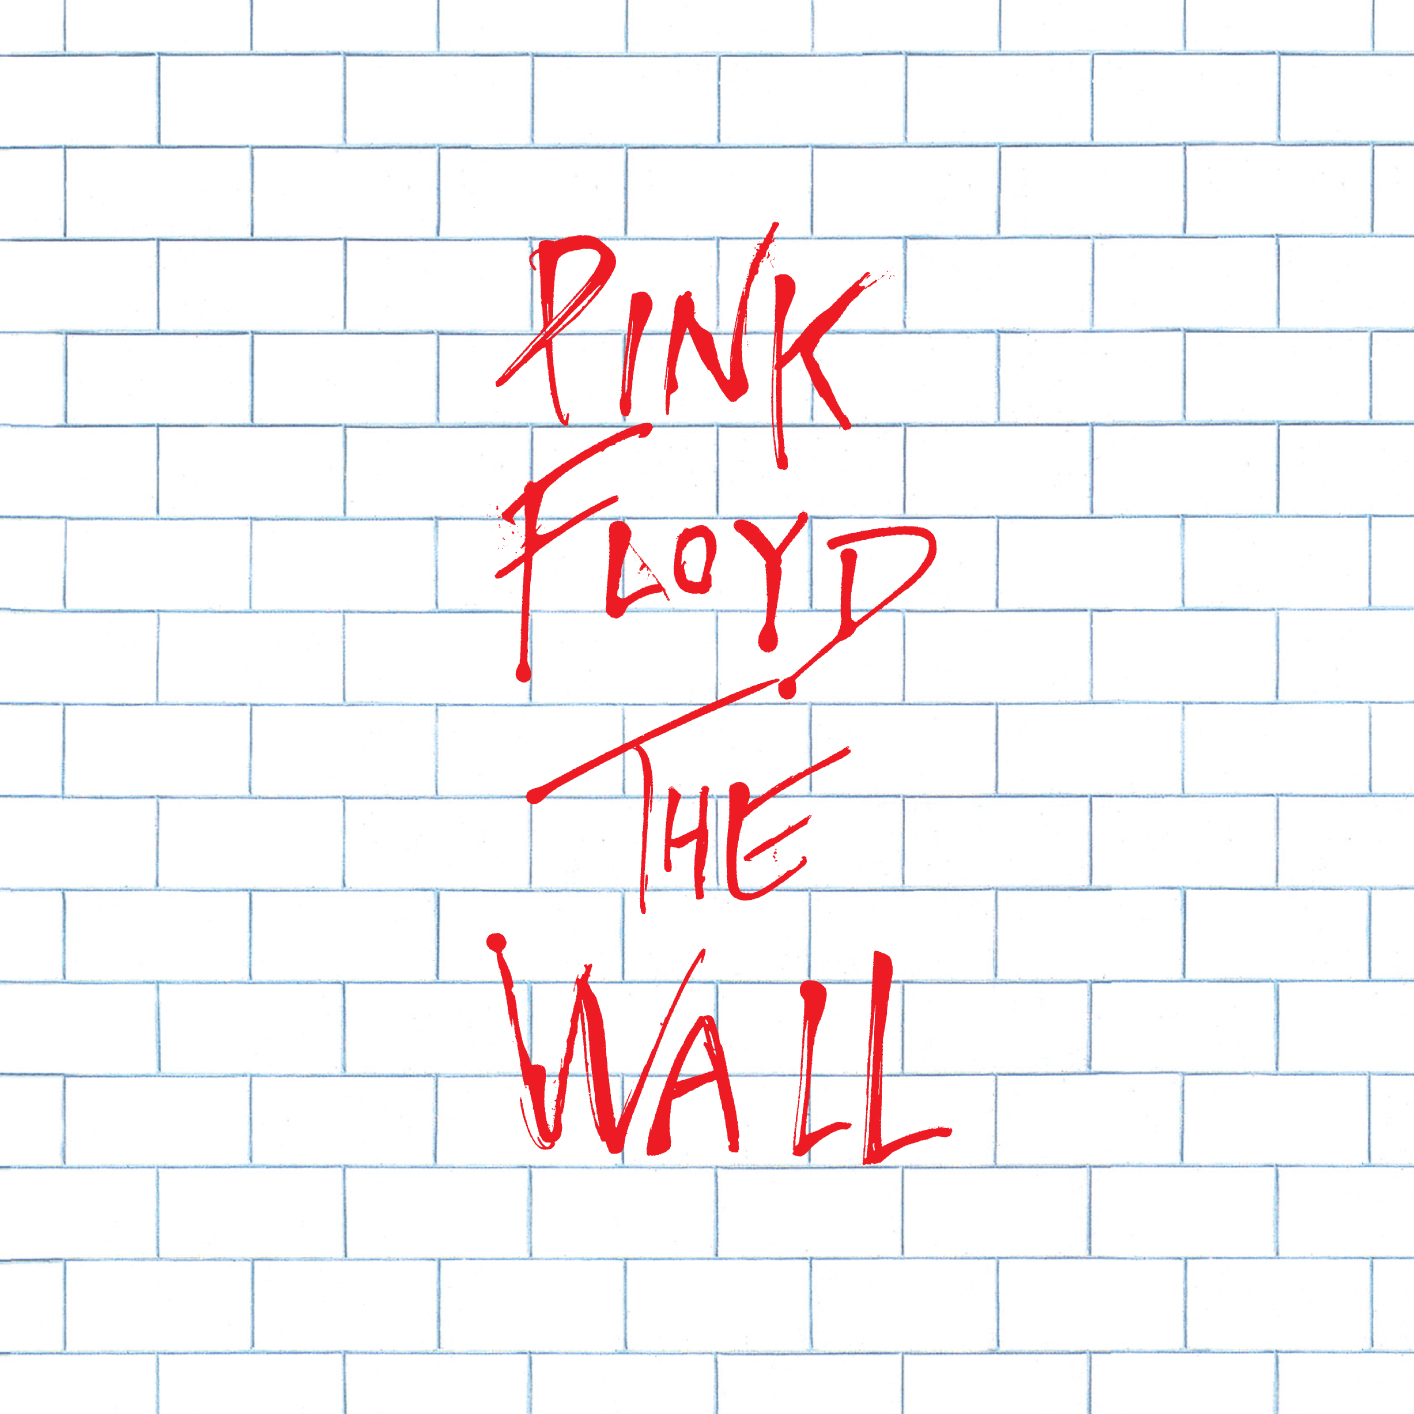 sint-tico-97-foto-album-or-cover-pink-floyd-the-wall-cena-hermosa